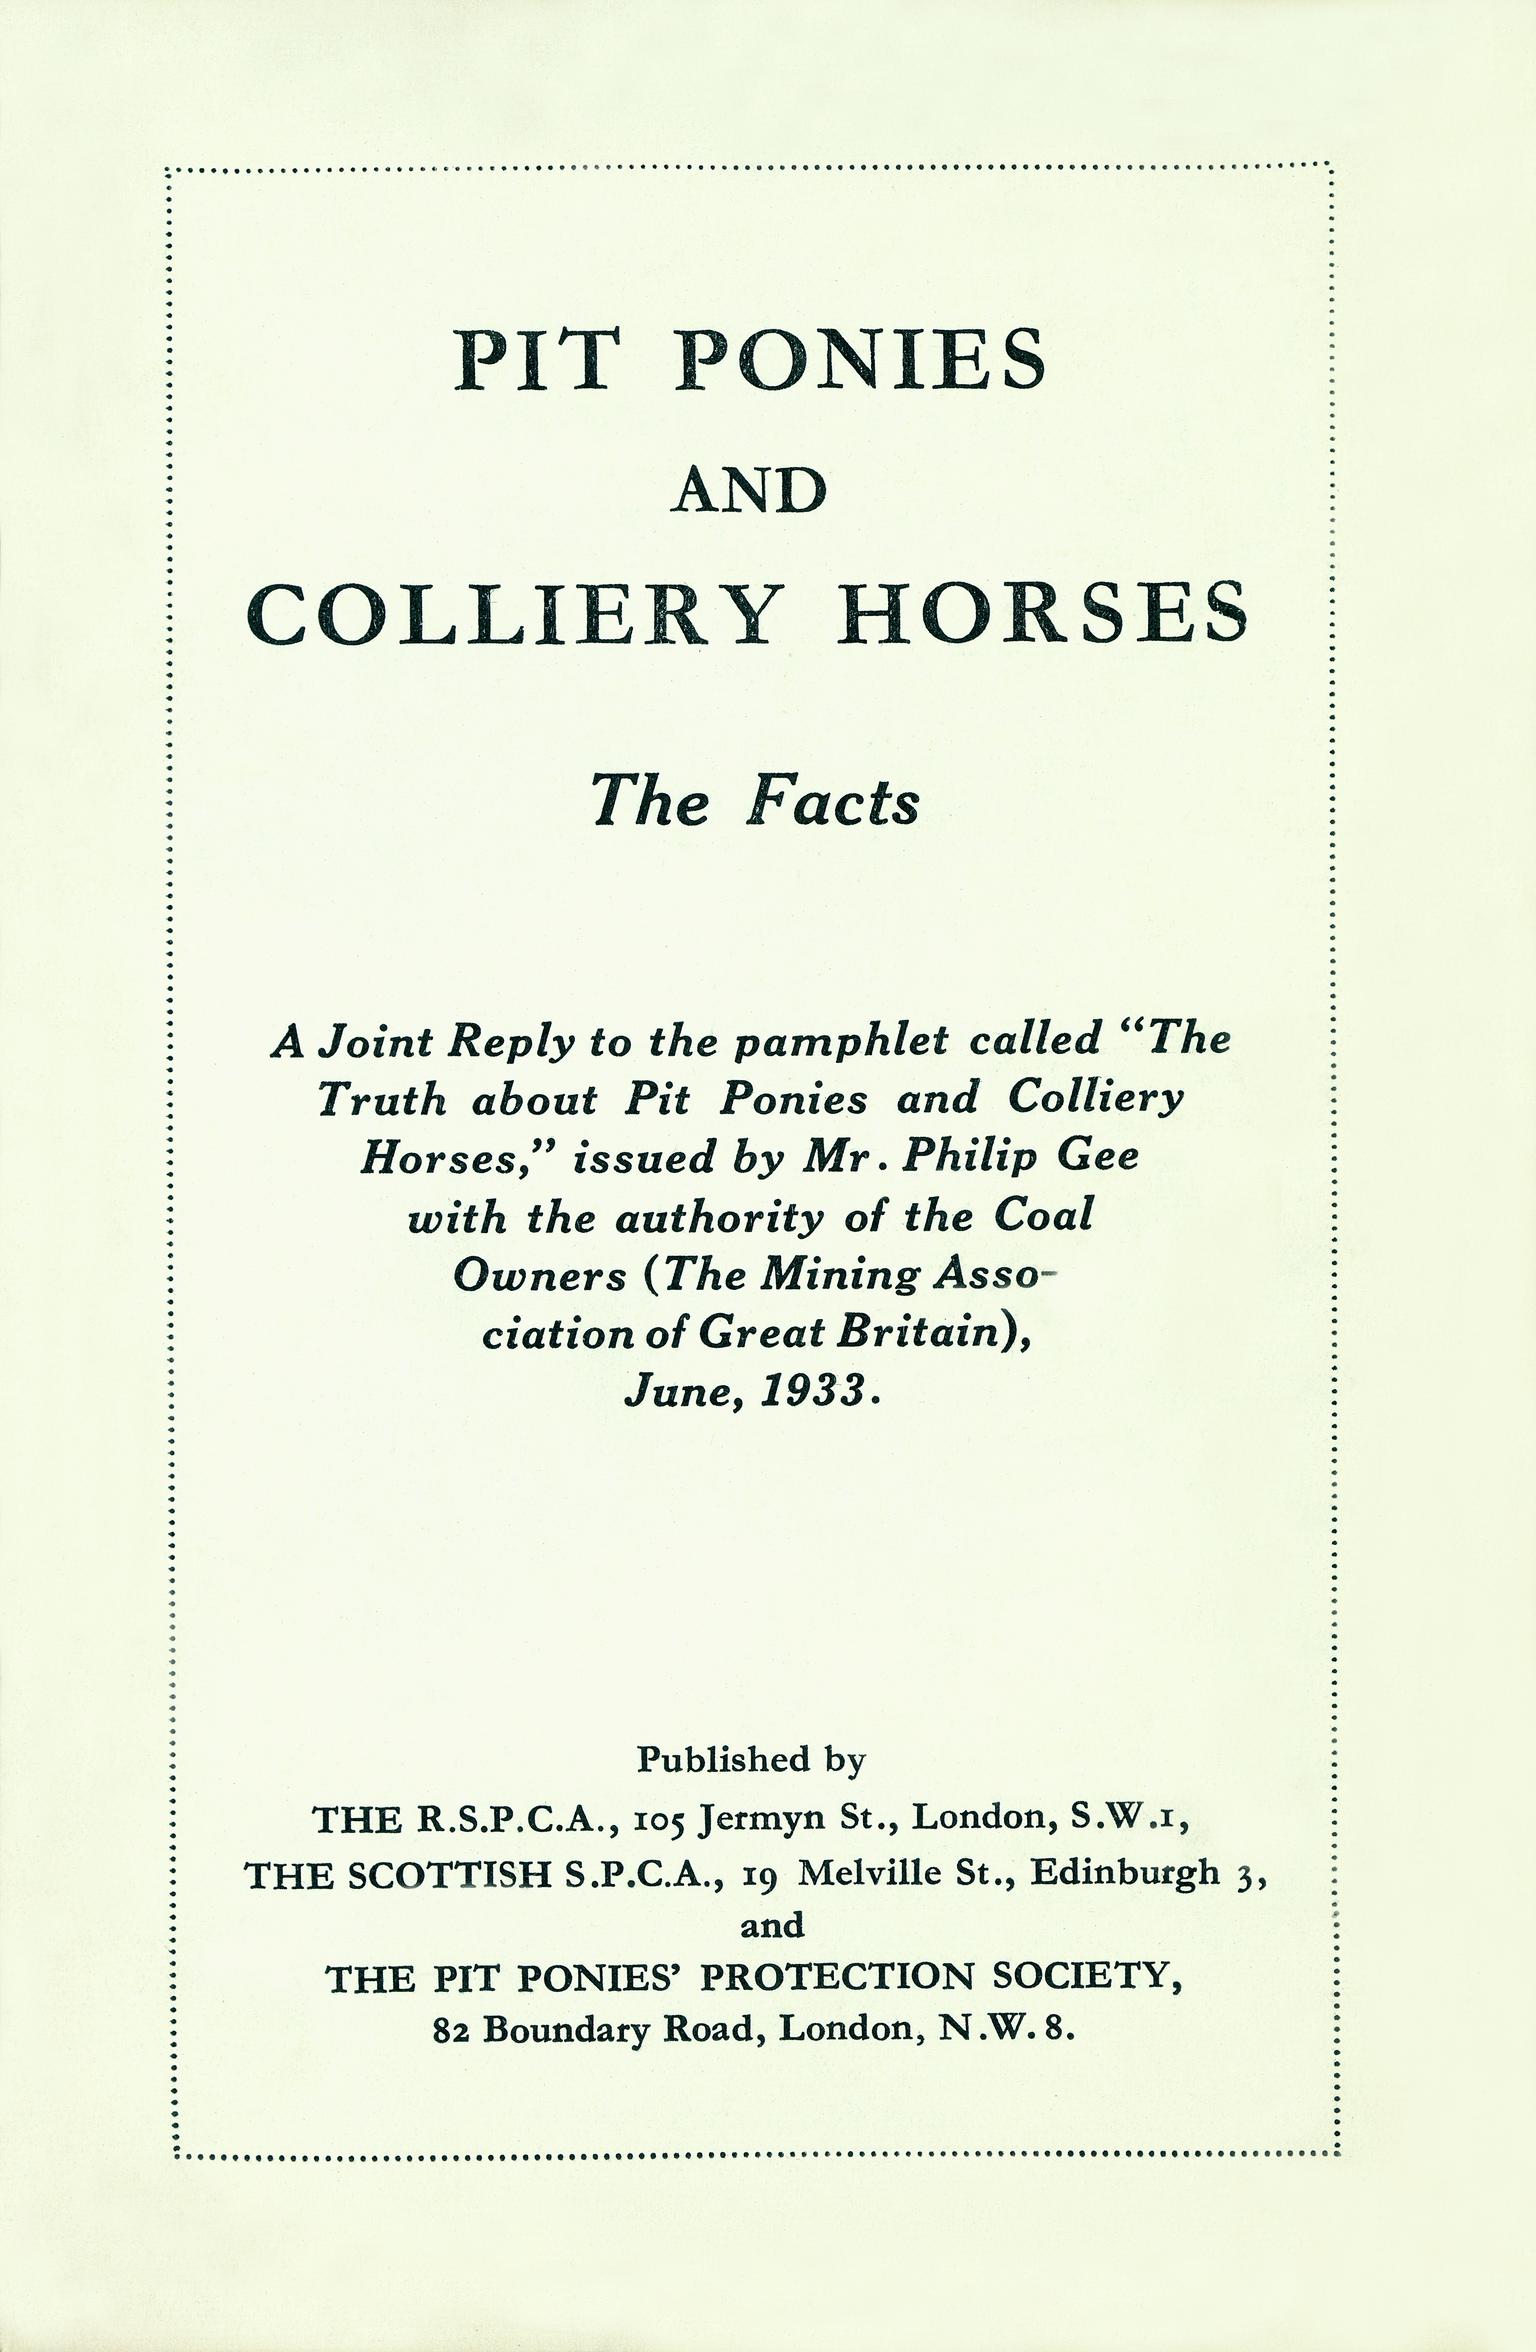 Pit Ponies and Colliery Horses The Facts (booklet)